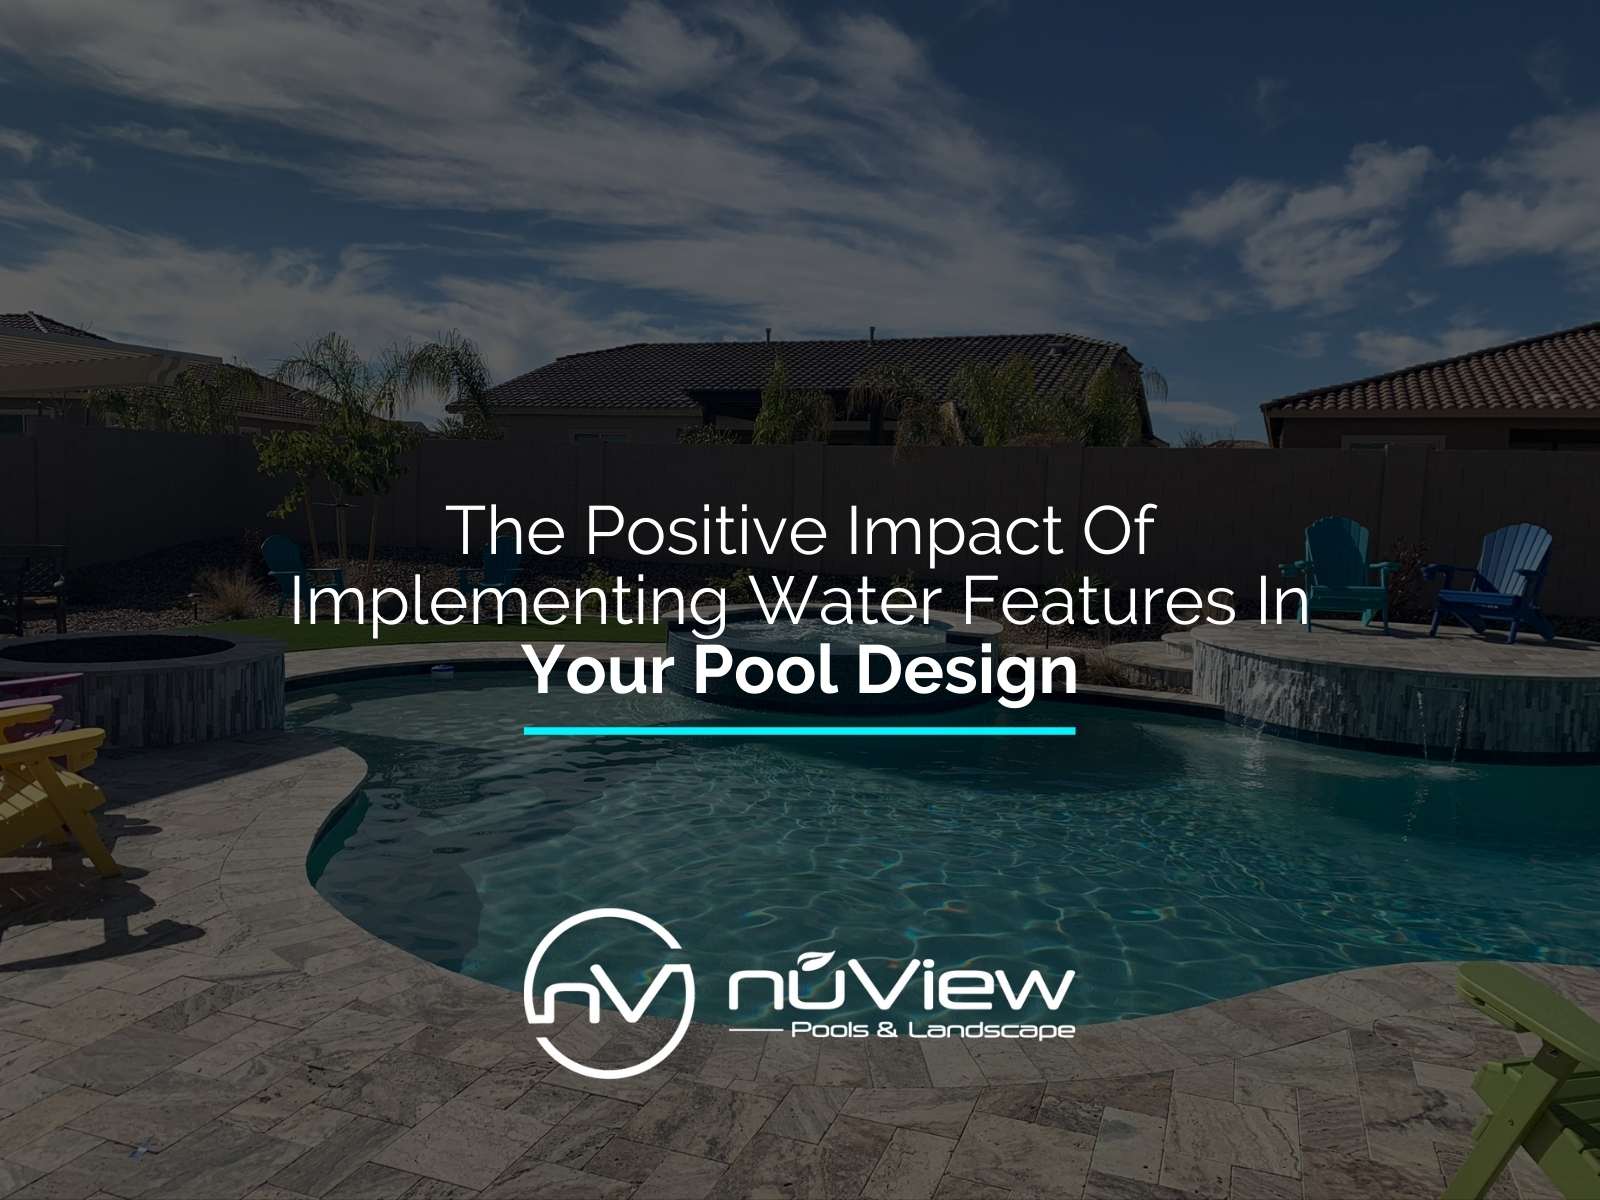 The Positive Impact Of Implementing Water Features In Your Pool Design